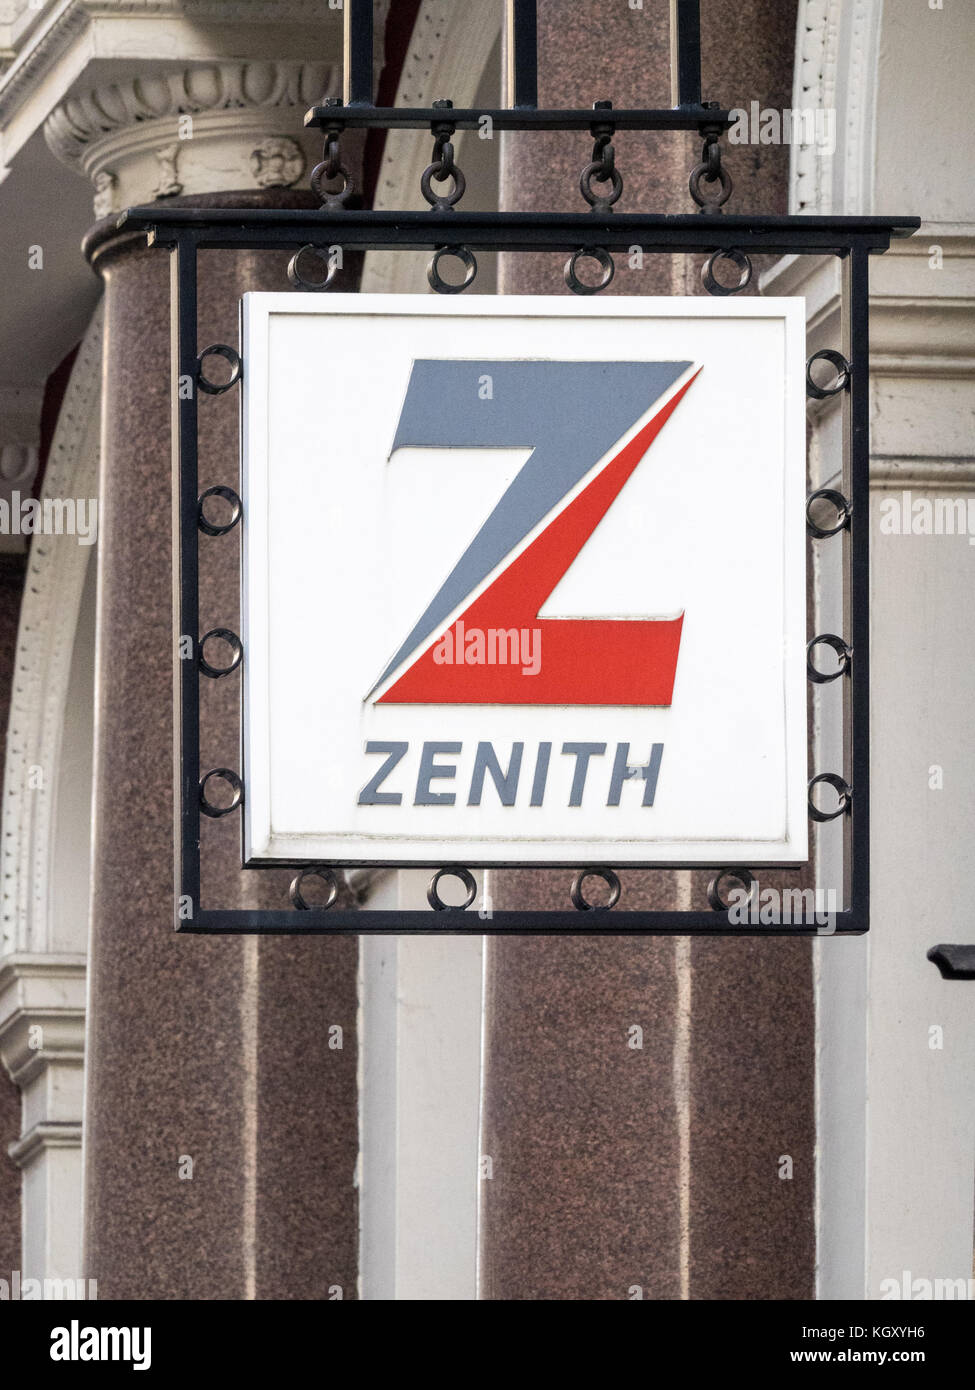 Zenith Bank building in the City of London Financial District. Zenith Bank 39 Cornhill, London. Zenith is a multinational Bank based in Nigeria, Stock Photo